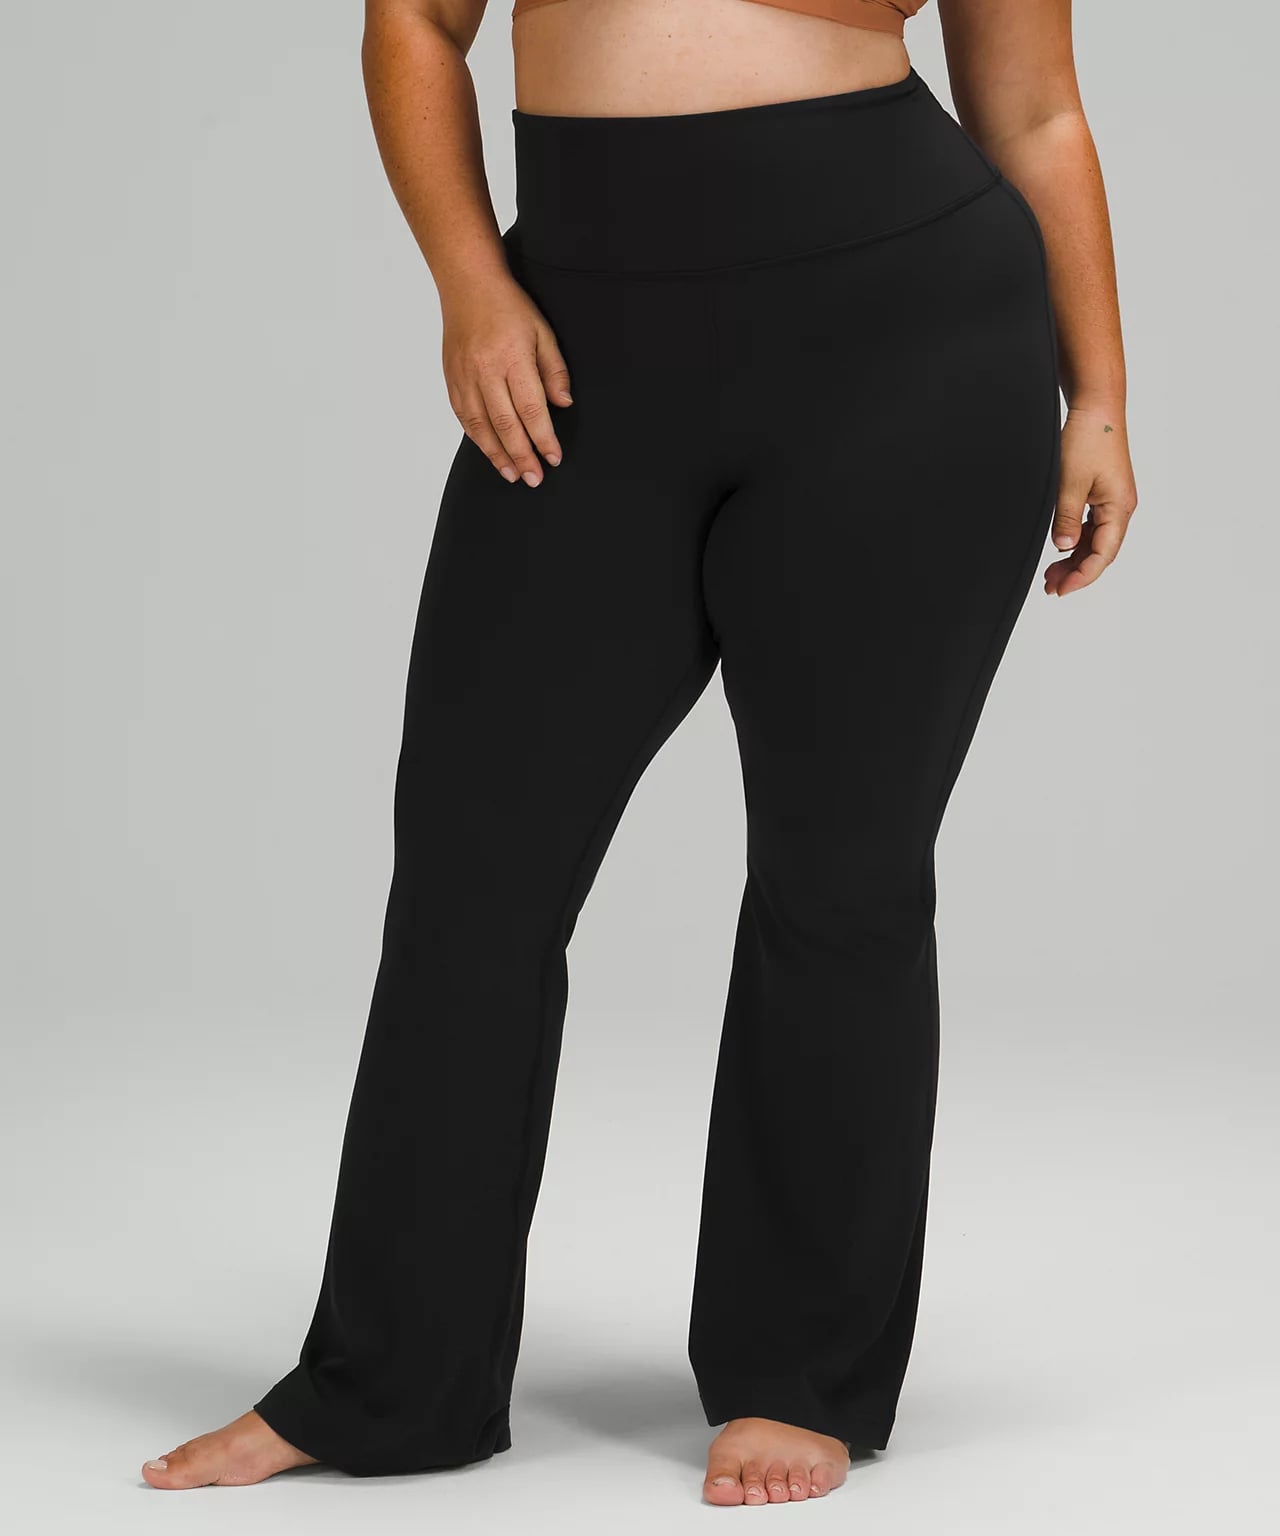 High Waisted Flared Groove Flared Yoga Pants Outfits For Women Nude Solid  Color, Shaping, Tight Fit, Ideal For Fitness, Jogging, And Gym Workouts  From Luyogastar, $18.94